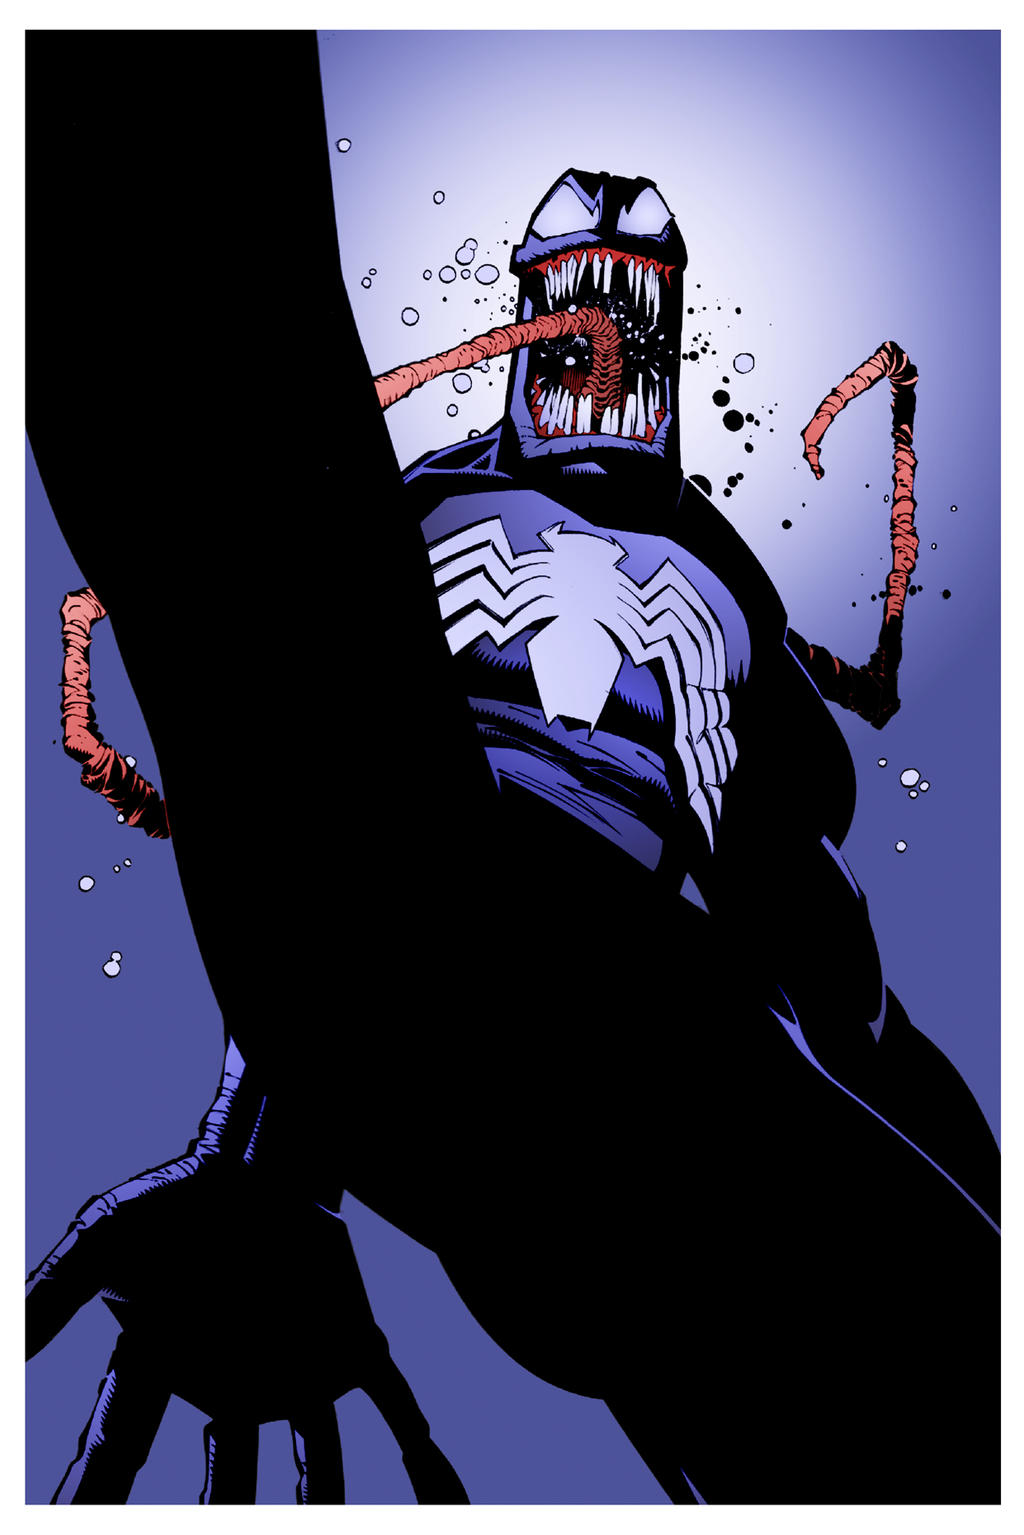 Venom by Bachalo and Townsend